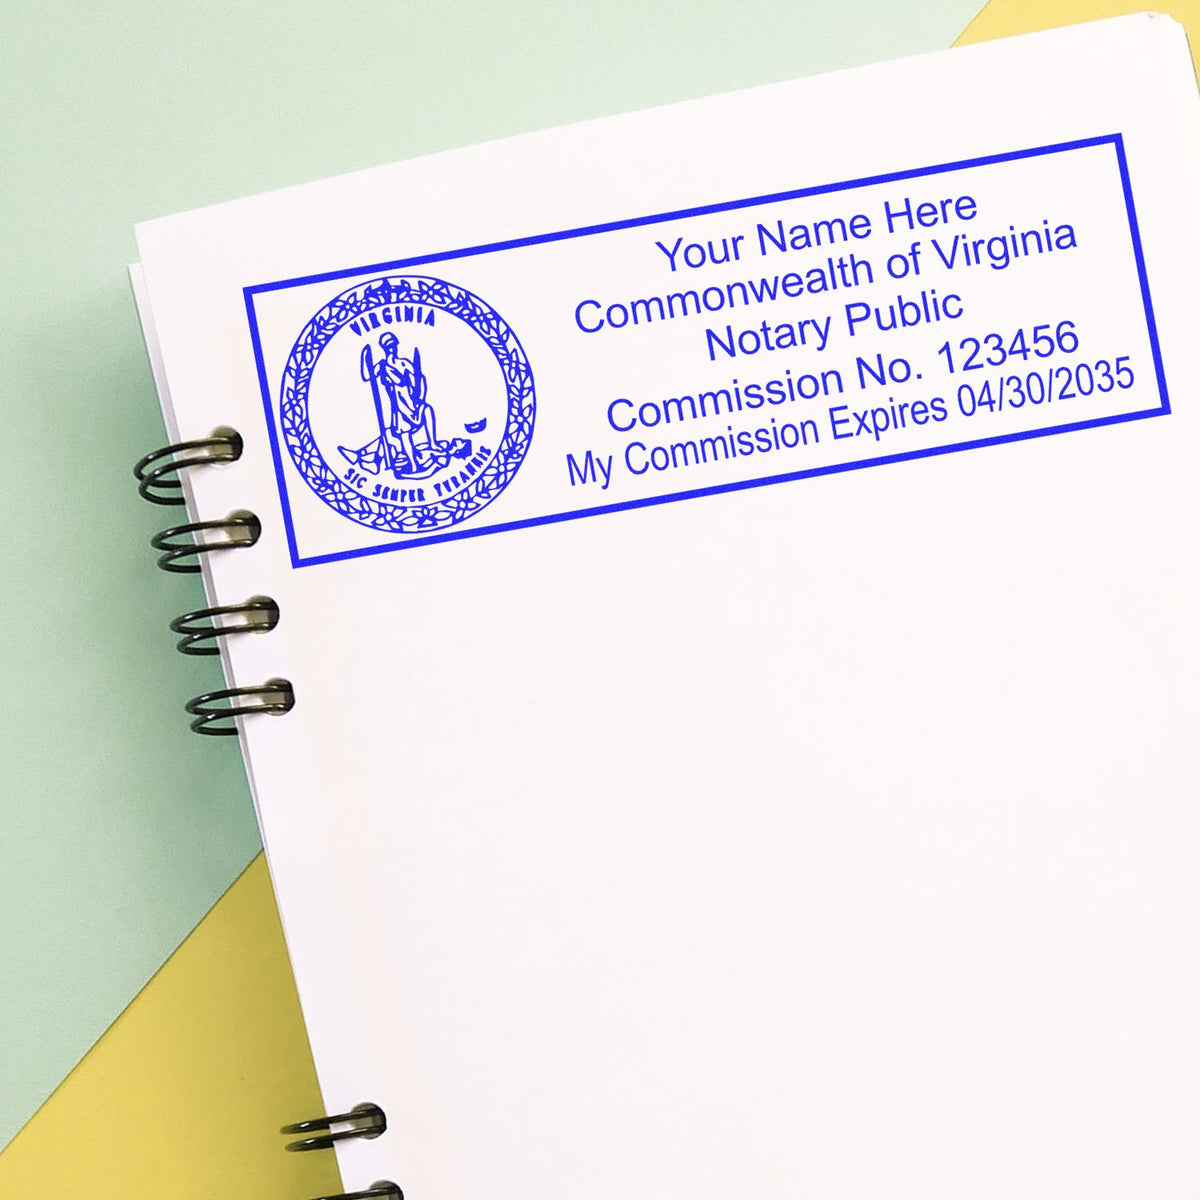 This paper is stamped with a sample imprint of the Slim Pre-Inked State Seal Notary Stamp for Virginia, signifying its quality and reliability.